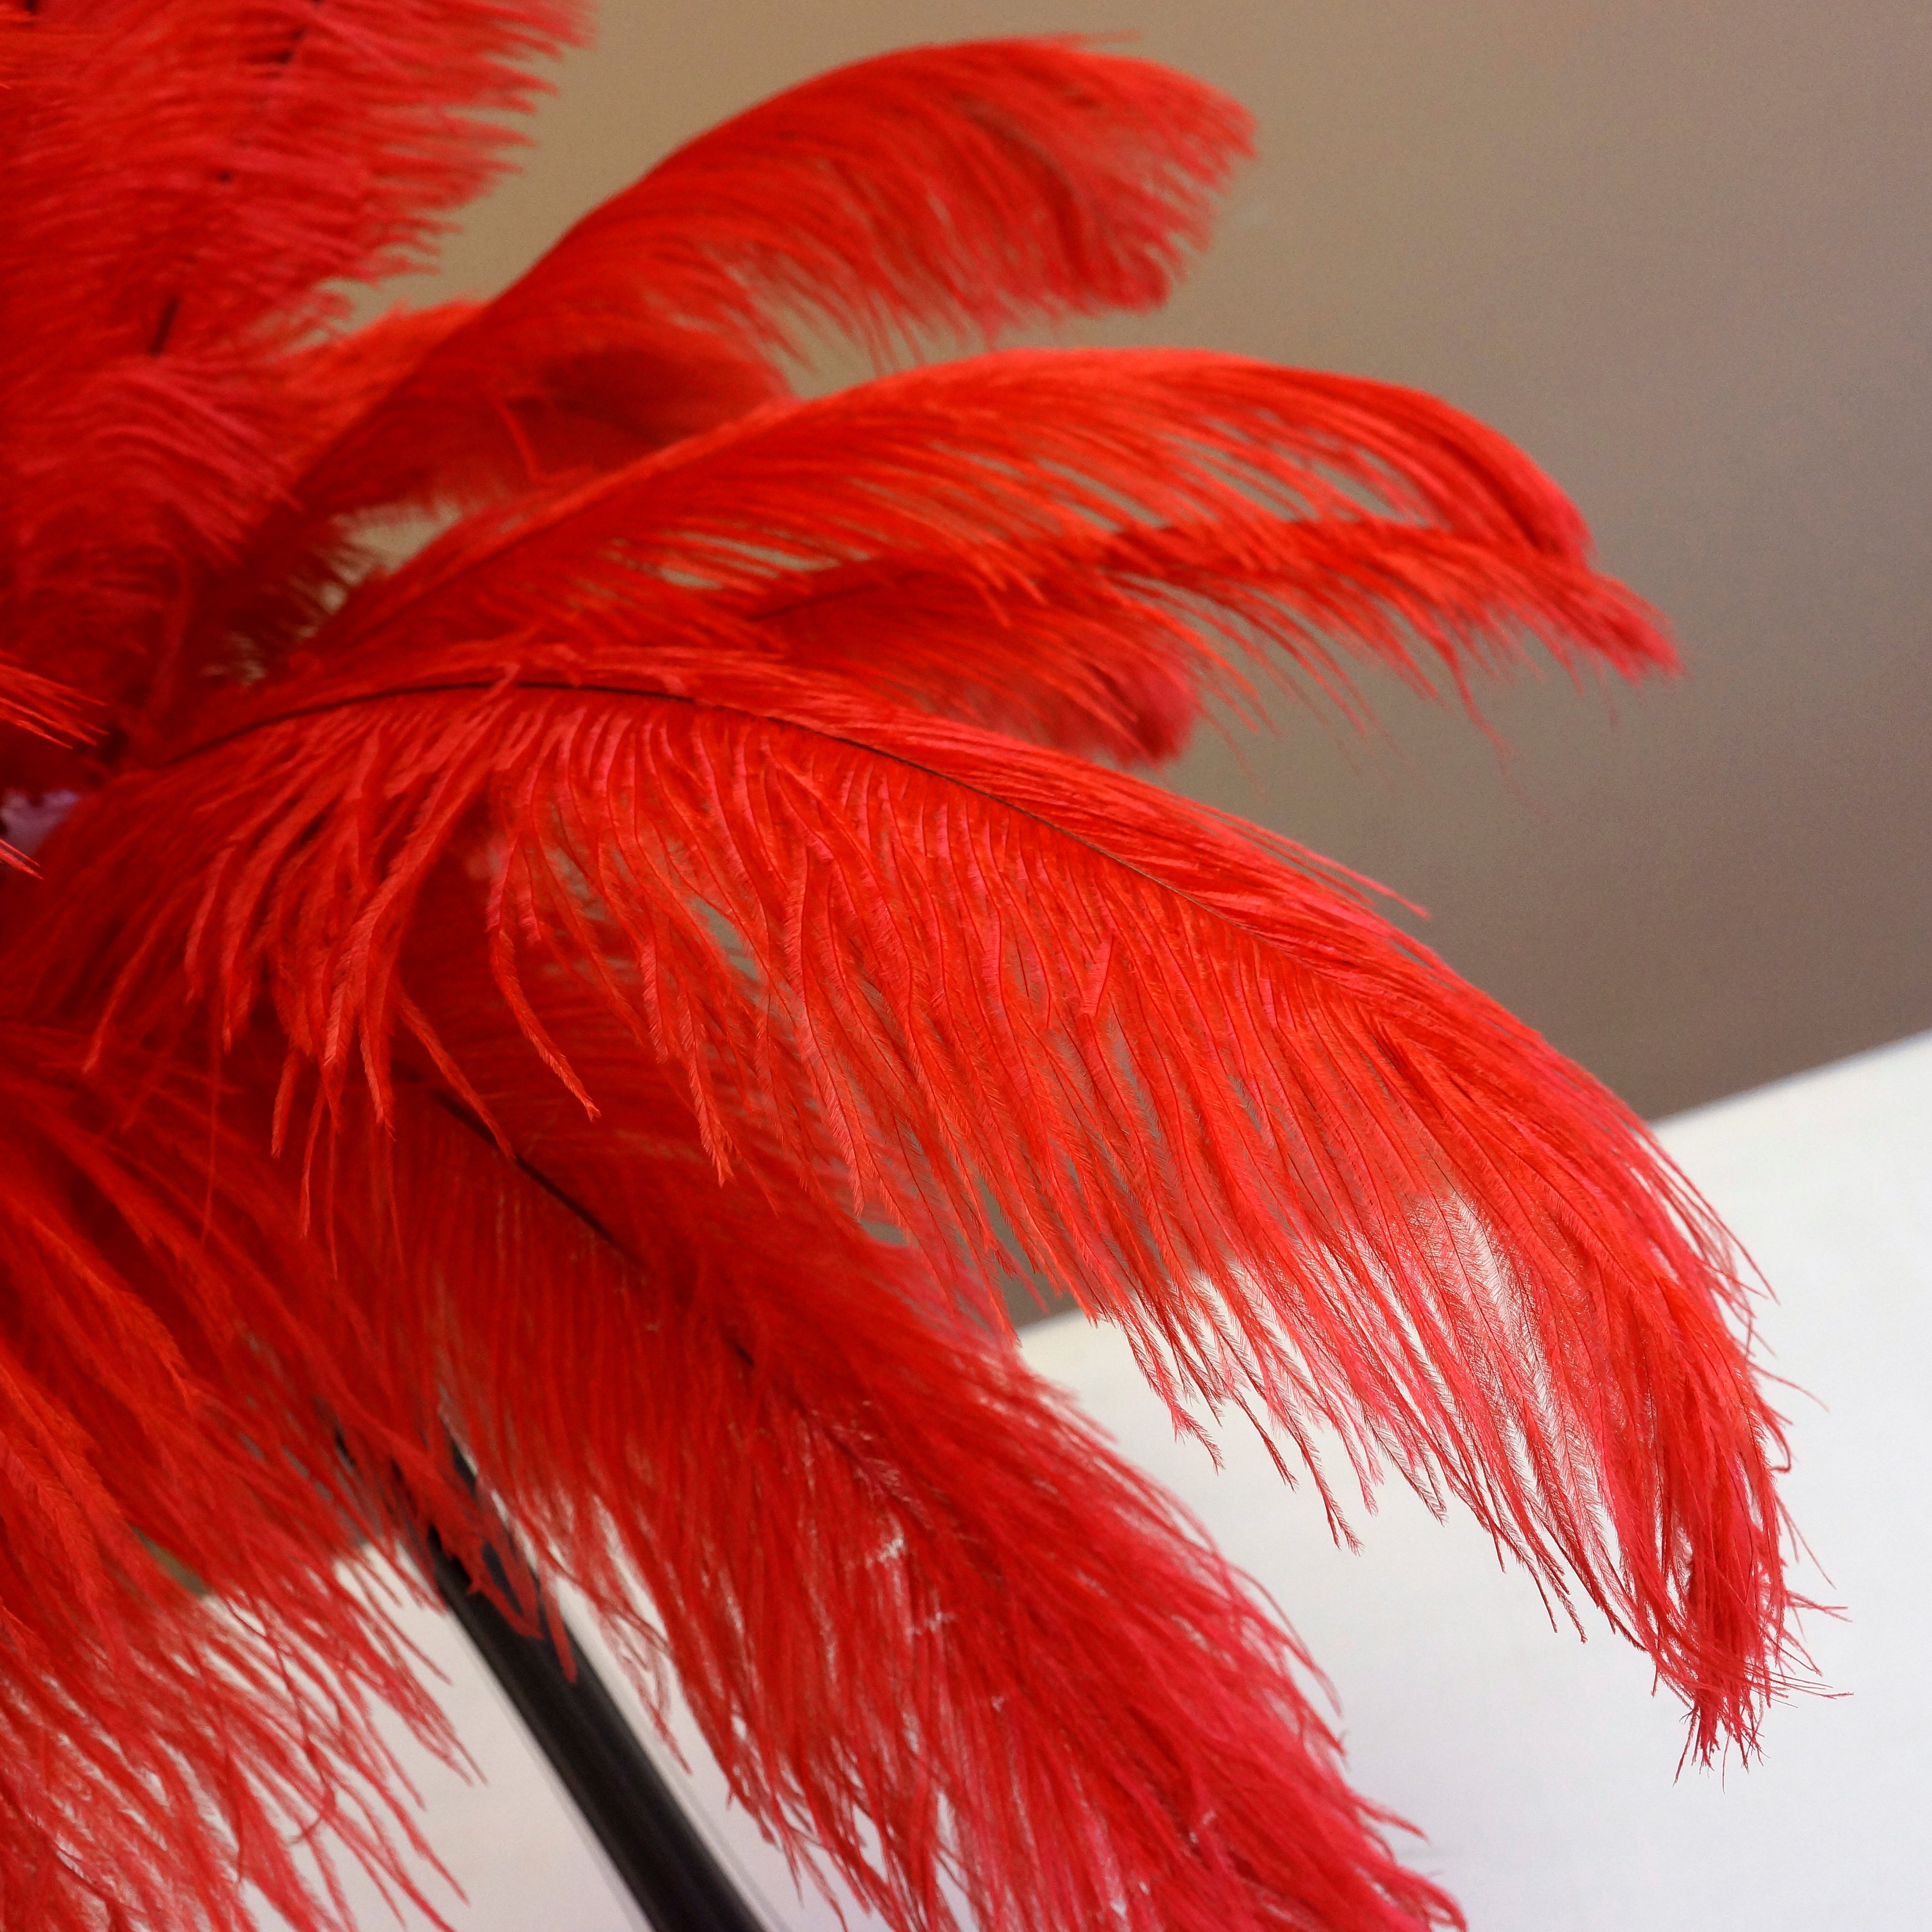 20pcs Various Red Feathers Goose Pheasant Feathers for Crafts Turkey  Marabou Rooster Plume Peacock Ostrich Accessories DIY Decor